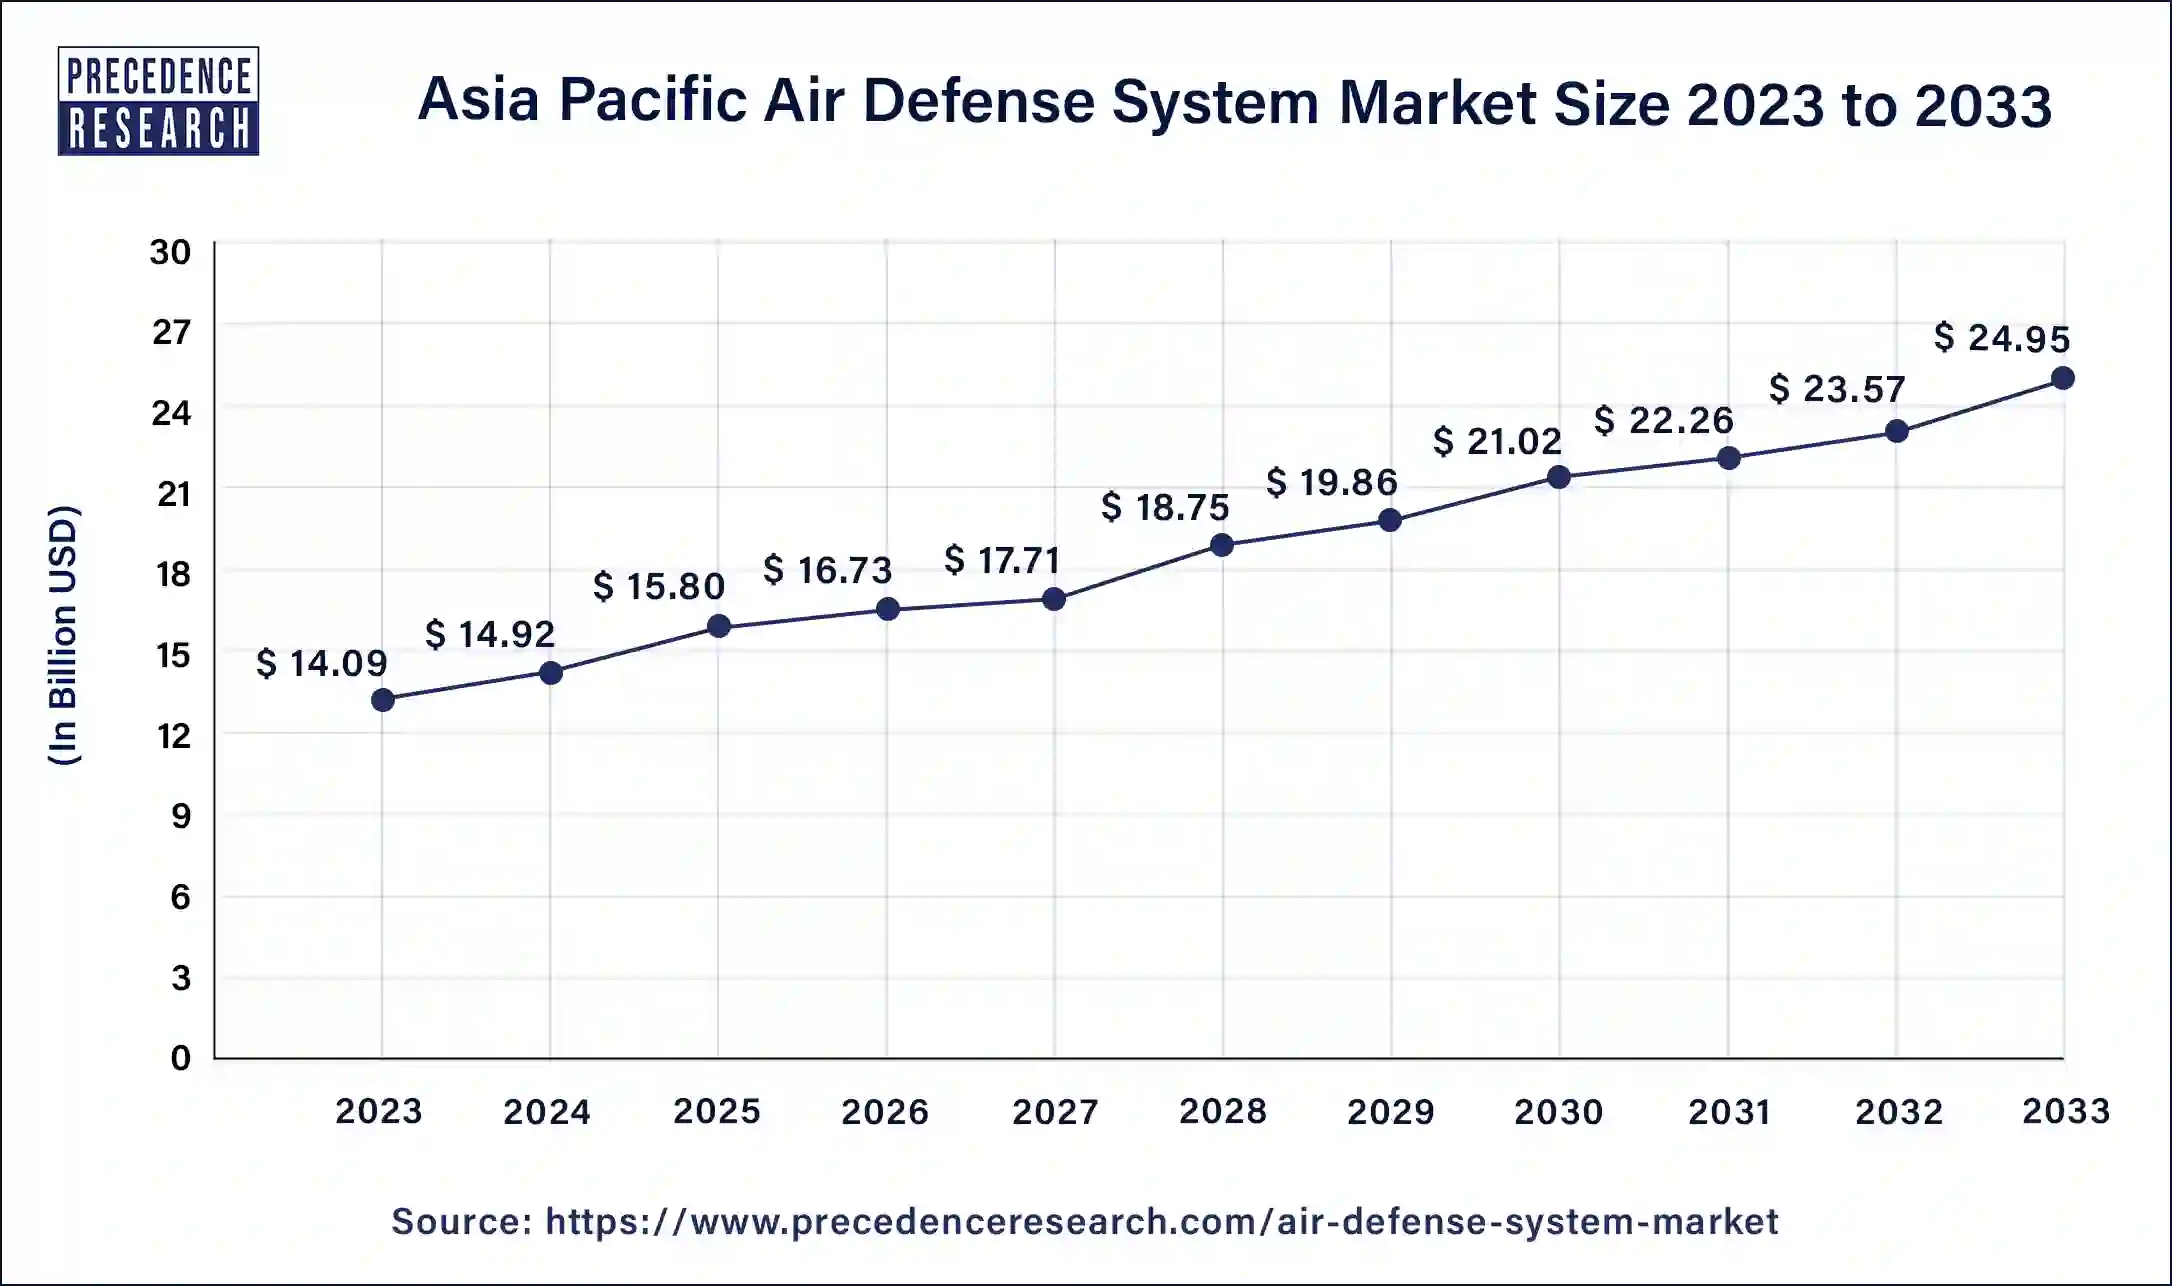 Asia Pacific Air Defense System Market Size 2024 to 2033